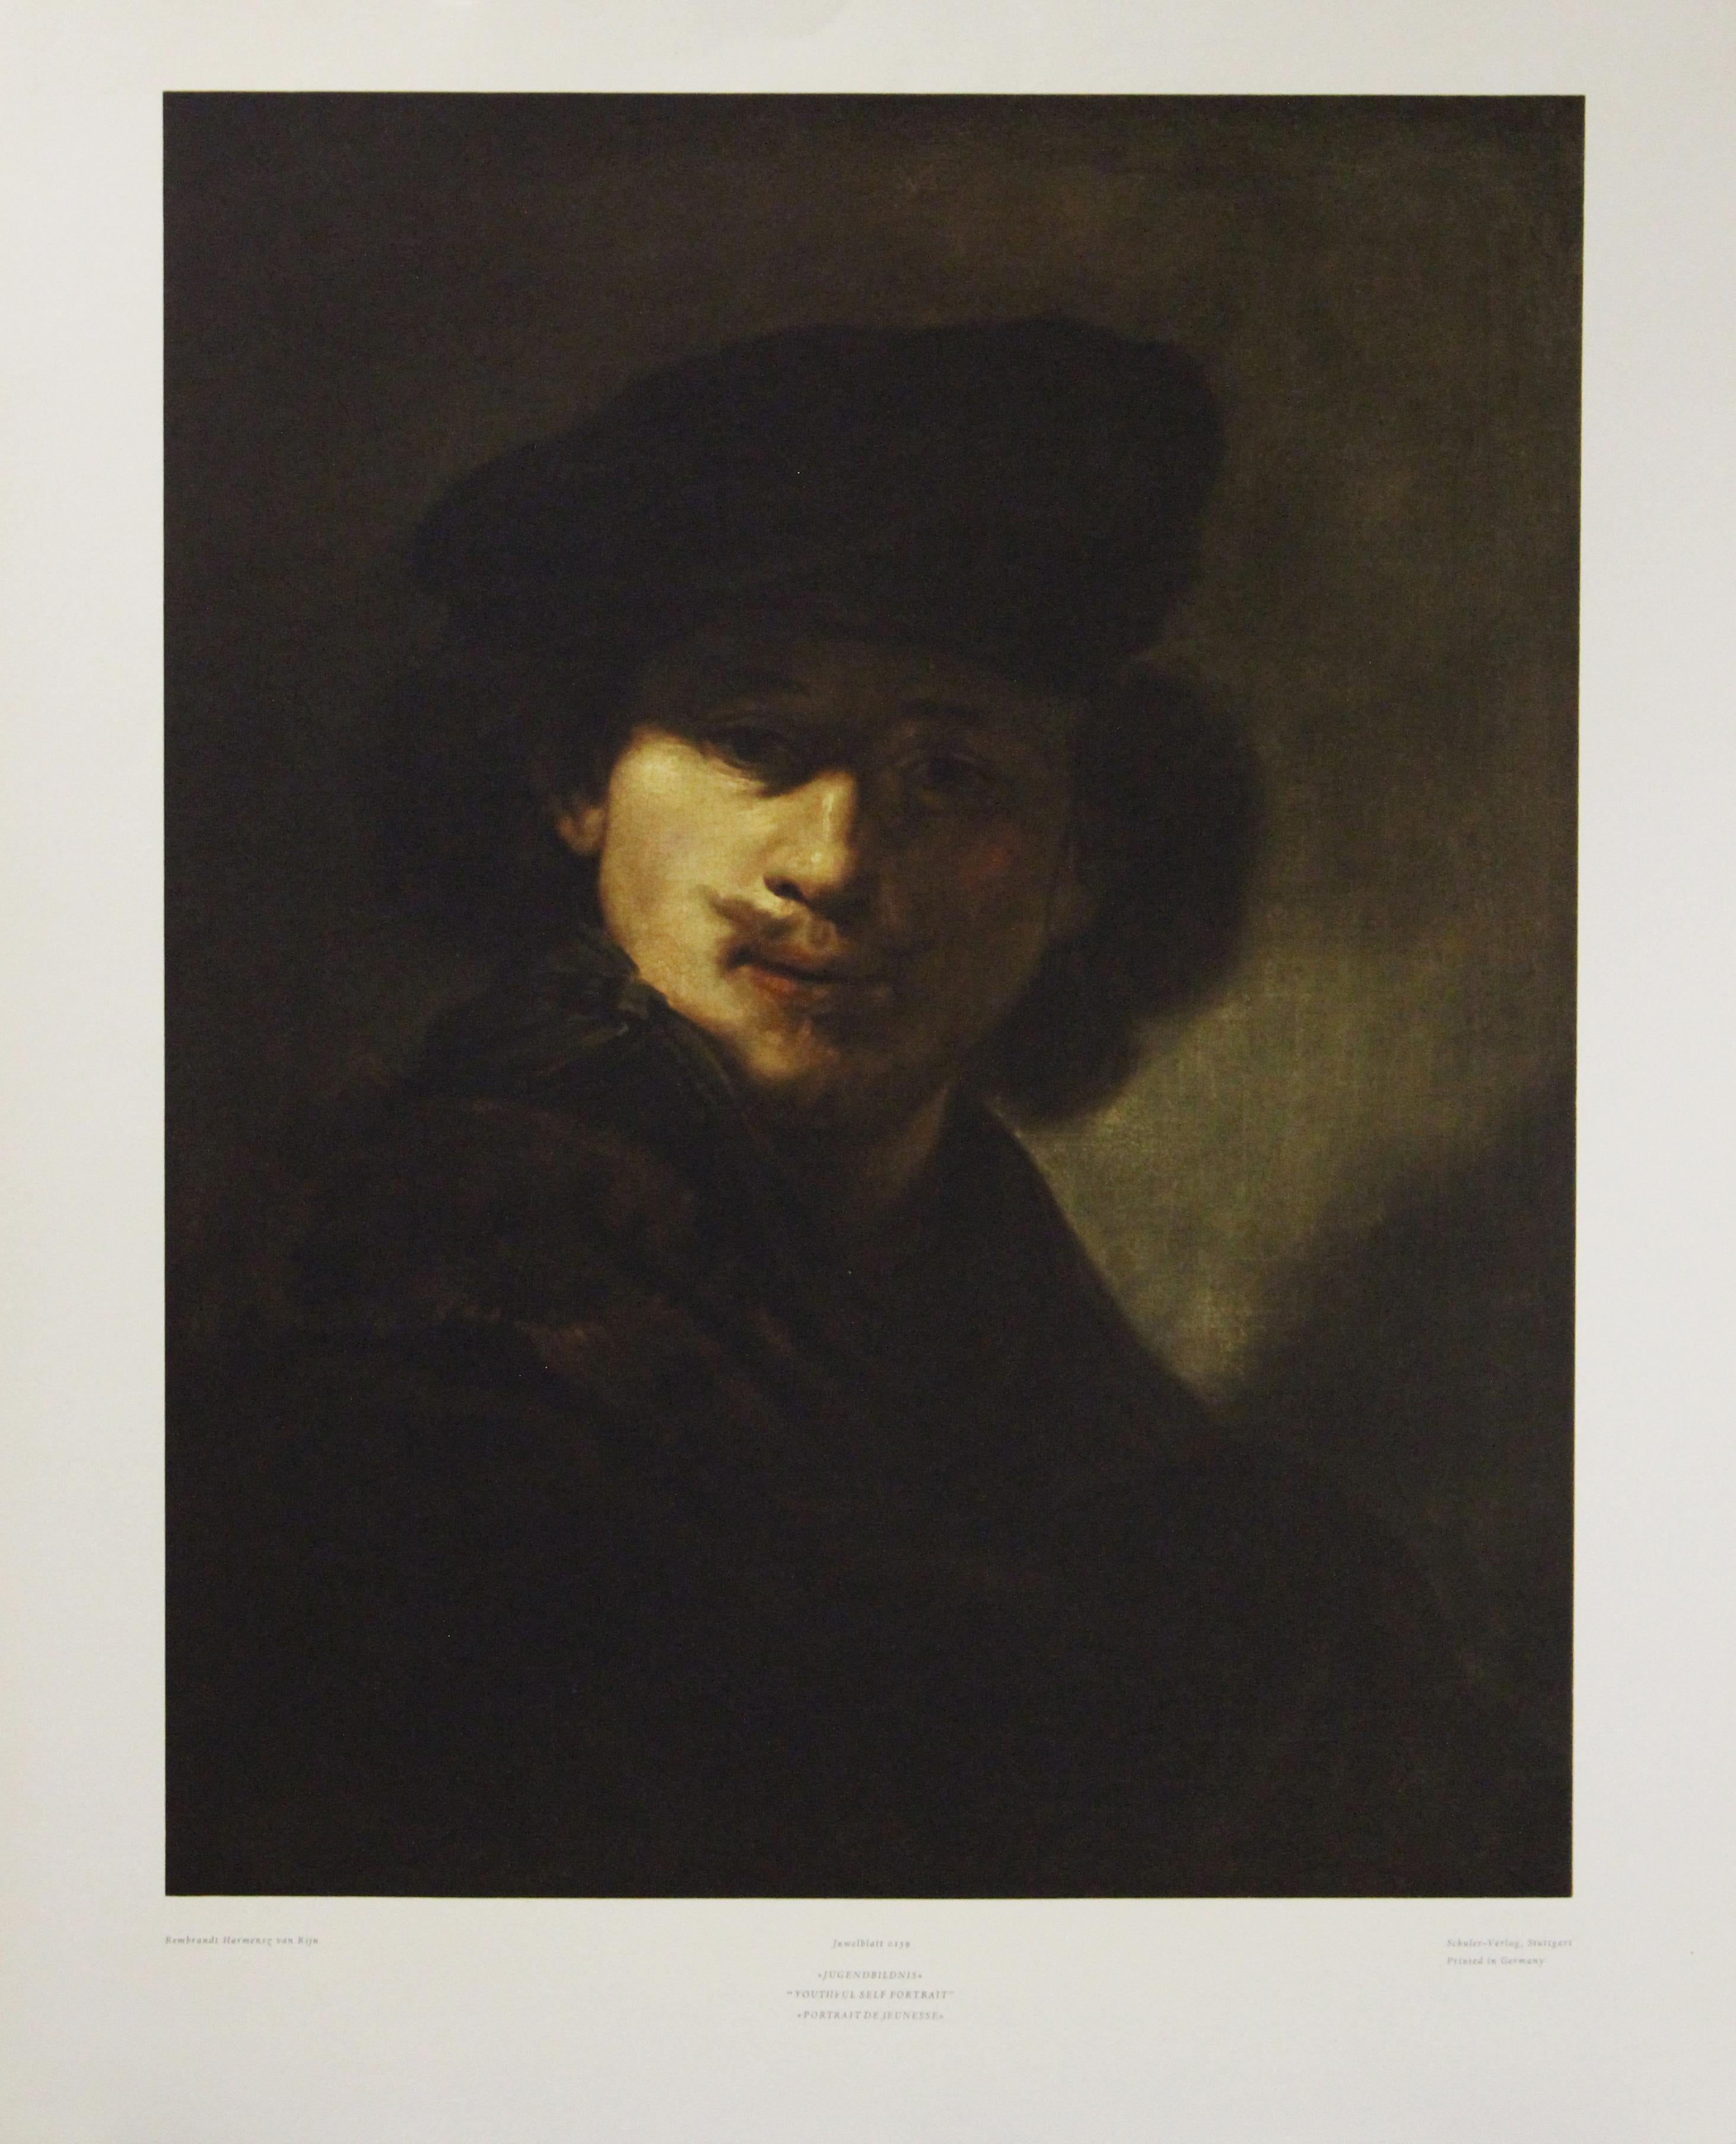 (After) Rembrandt van Rijn  Portrait Print - Youthful Self Portrait-Poster. Printed in Germany. 